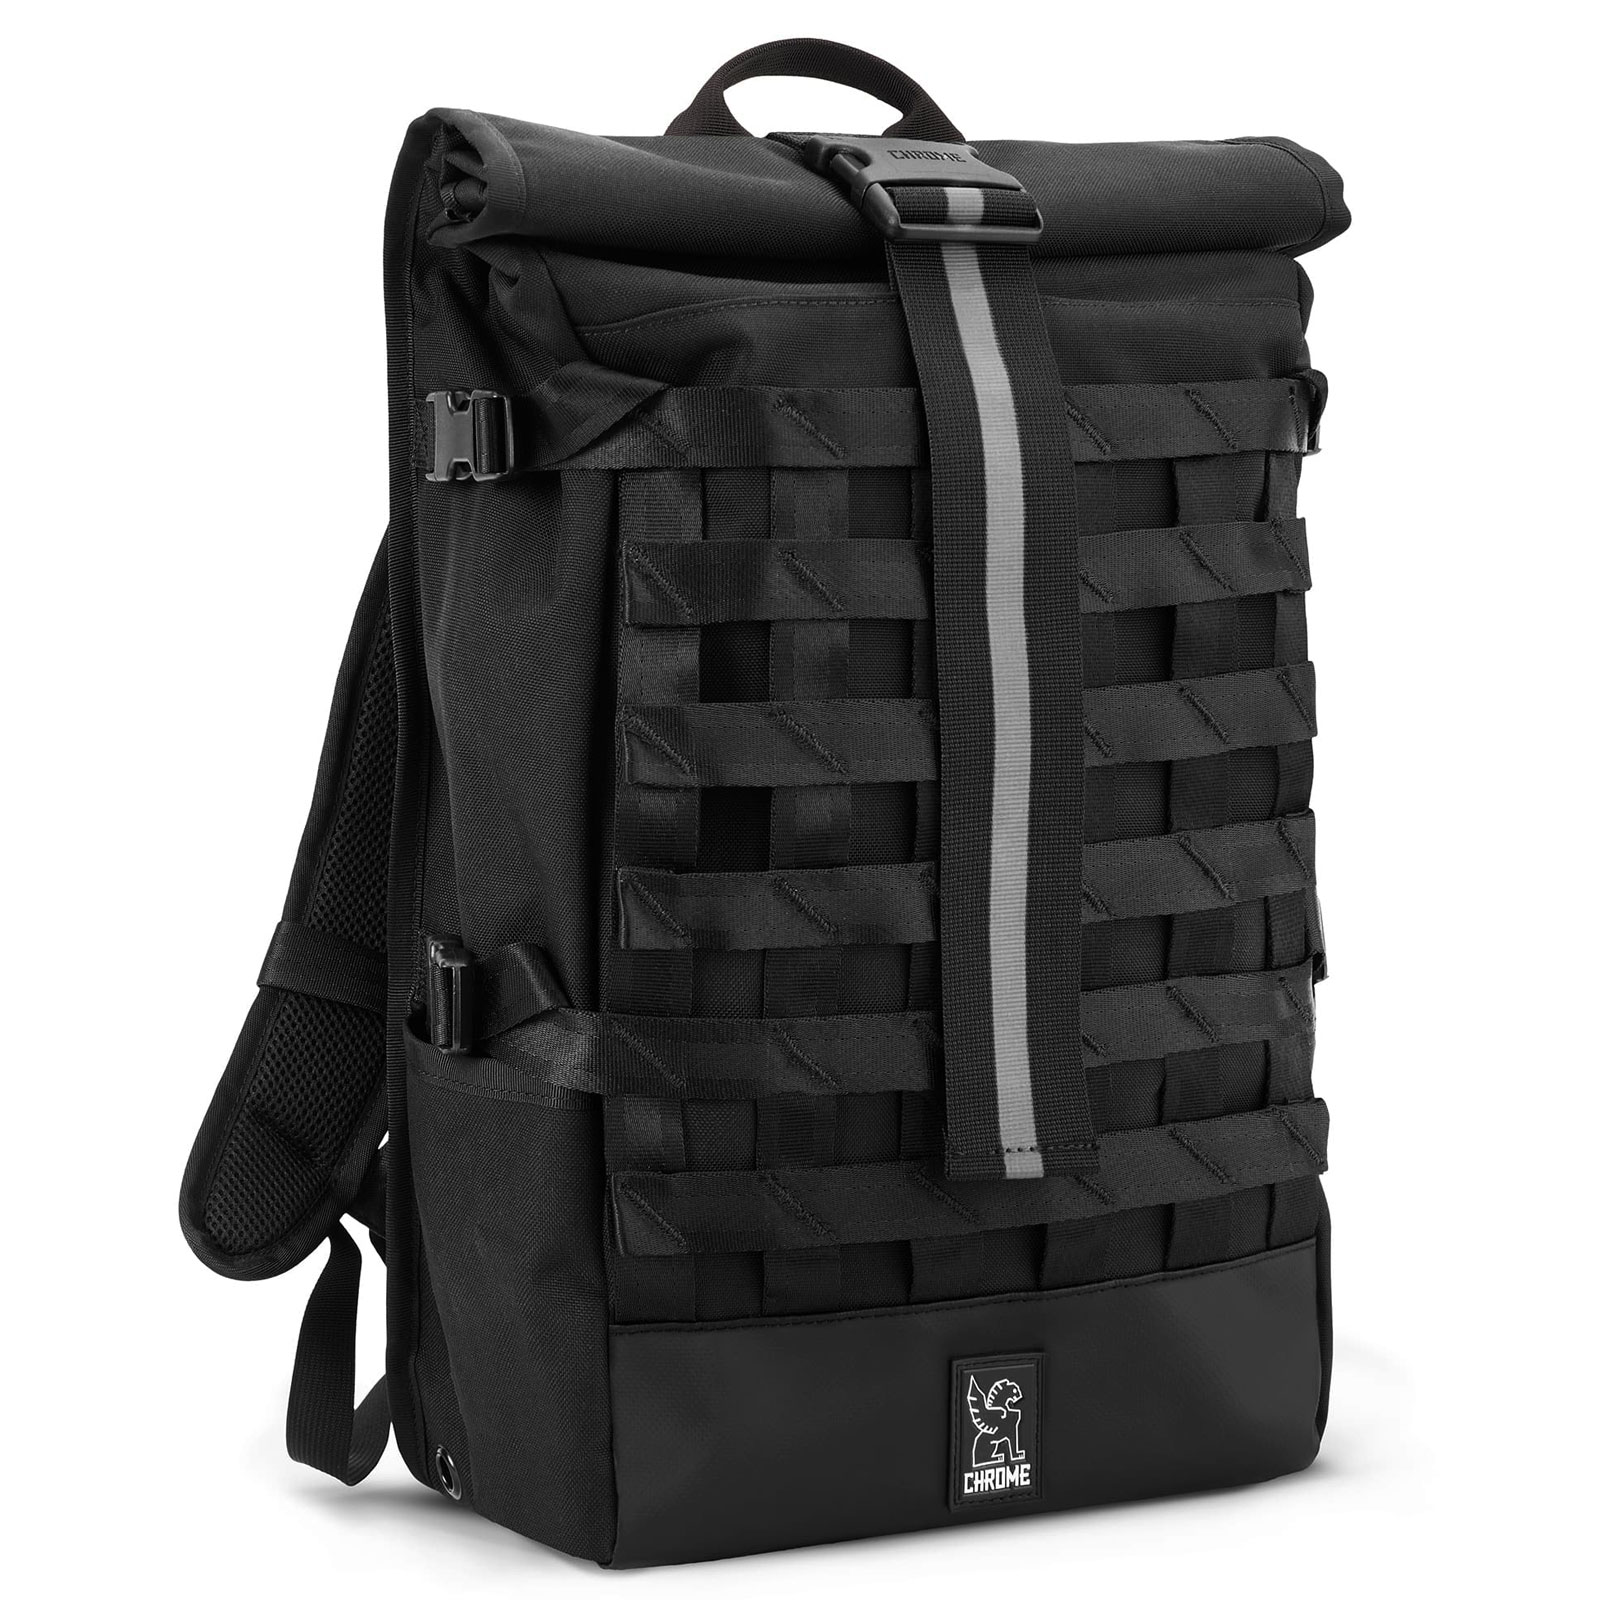 Picture of CHROME Barrage Cargo - Backpack - 18-22 L - Black